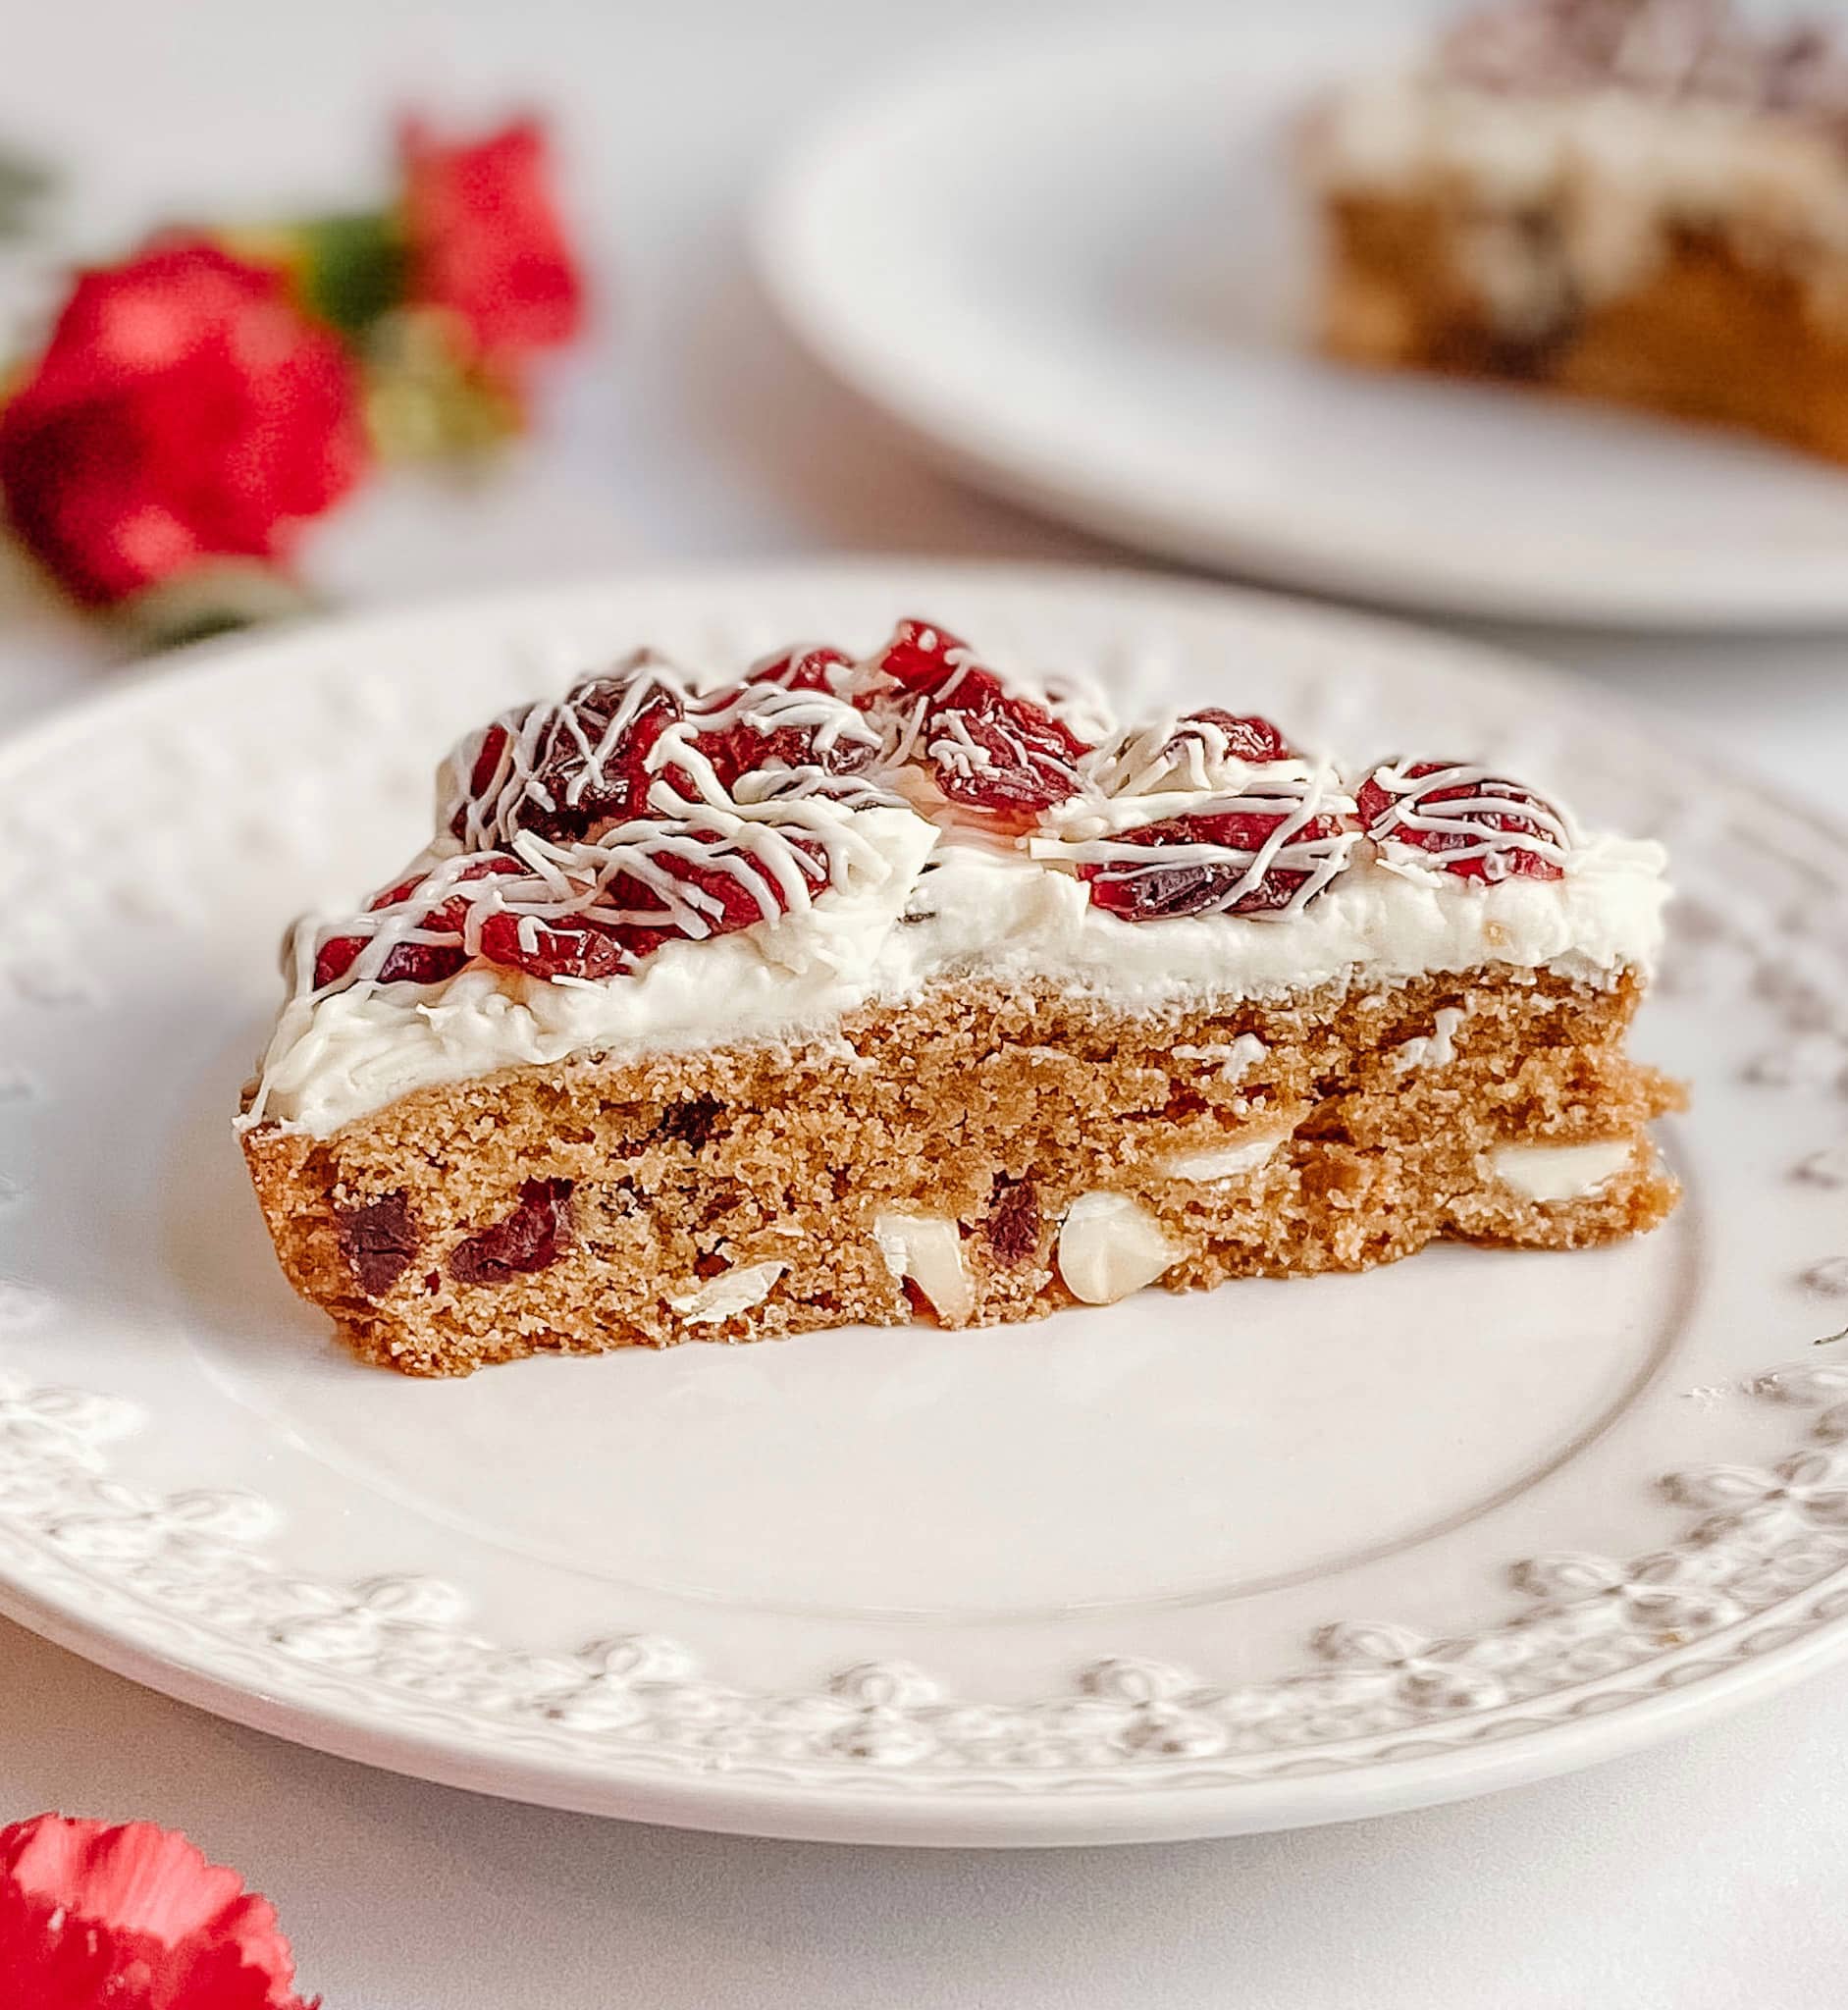 A single gluten-free cranberry bliss bar on plate. Large white chocolate chips and cranberries can be seen in the middle of the bar.